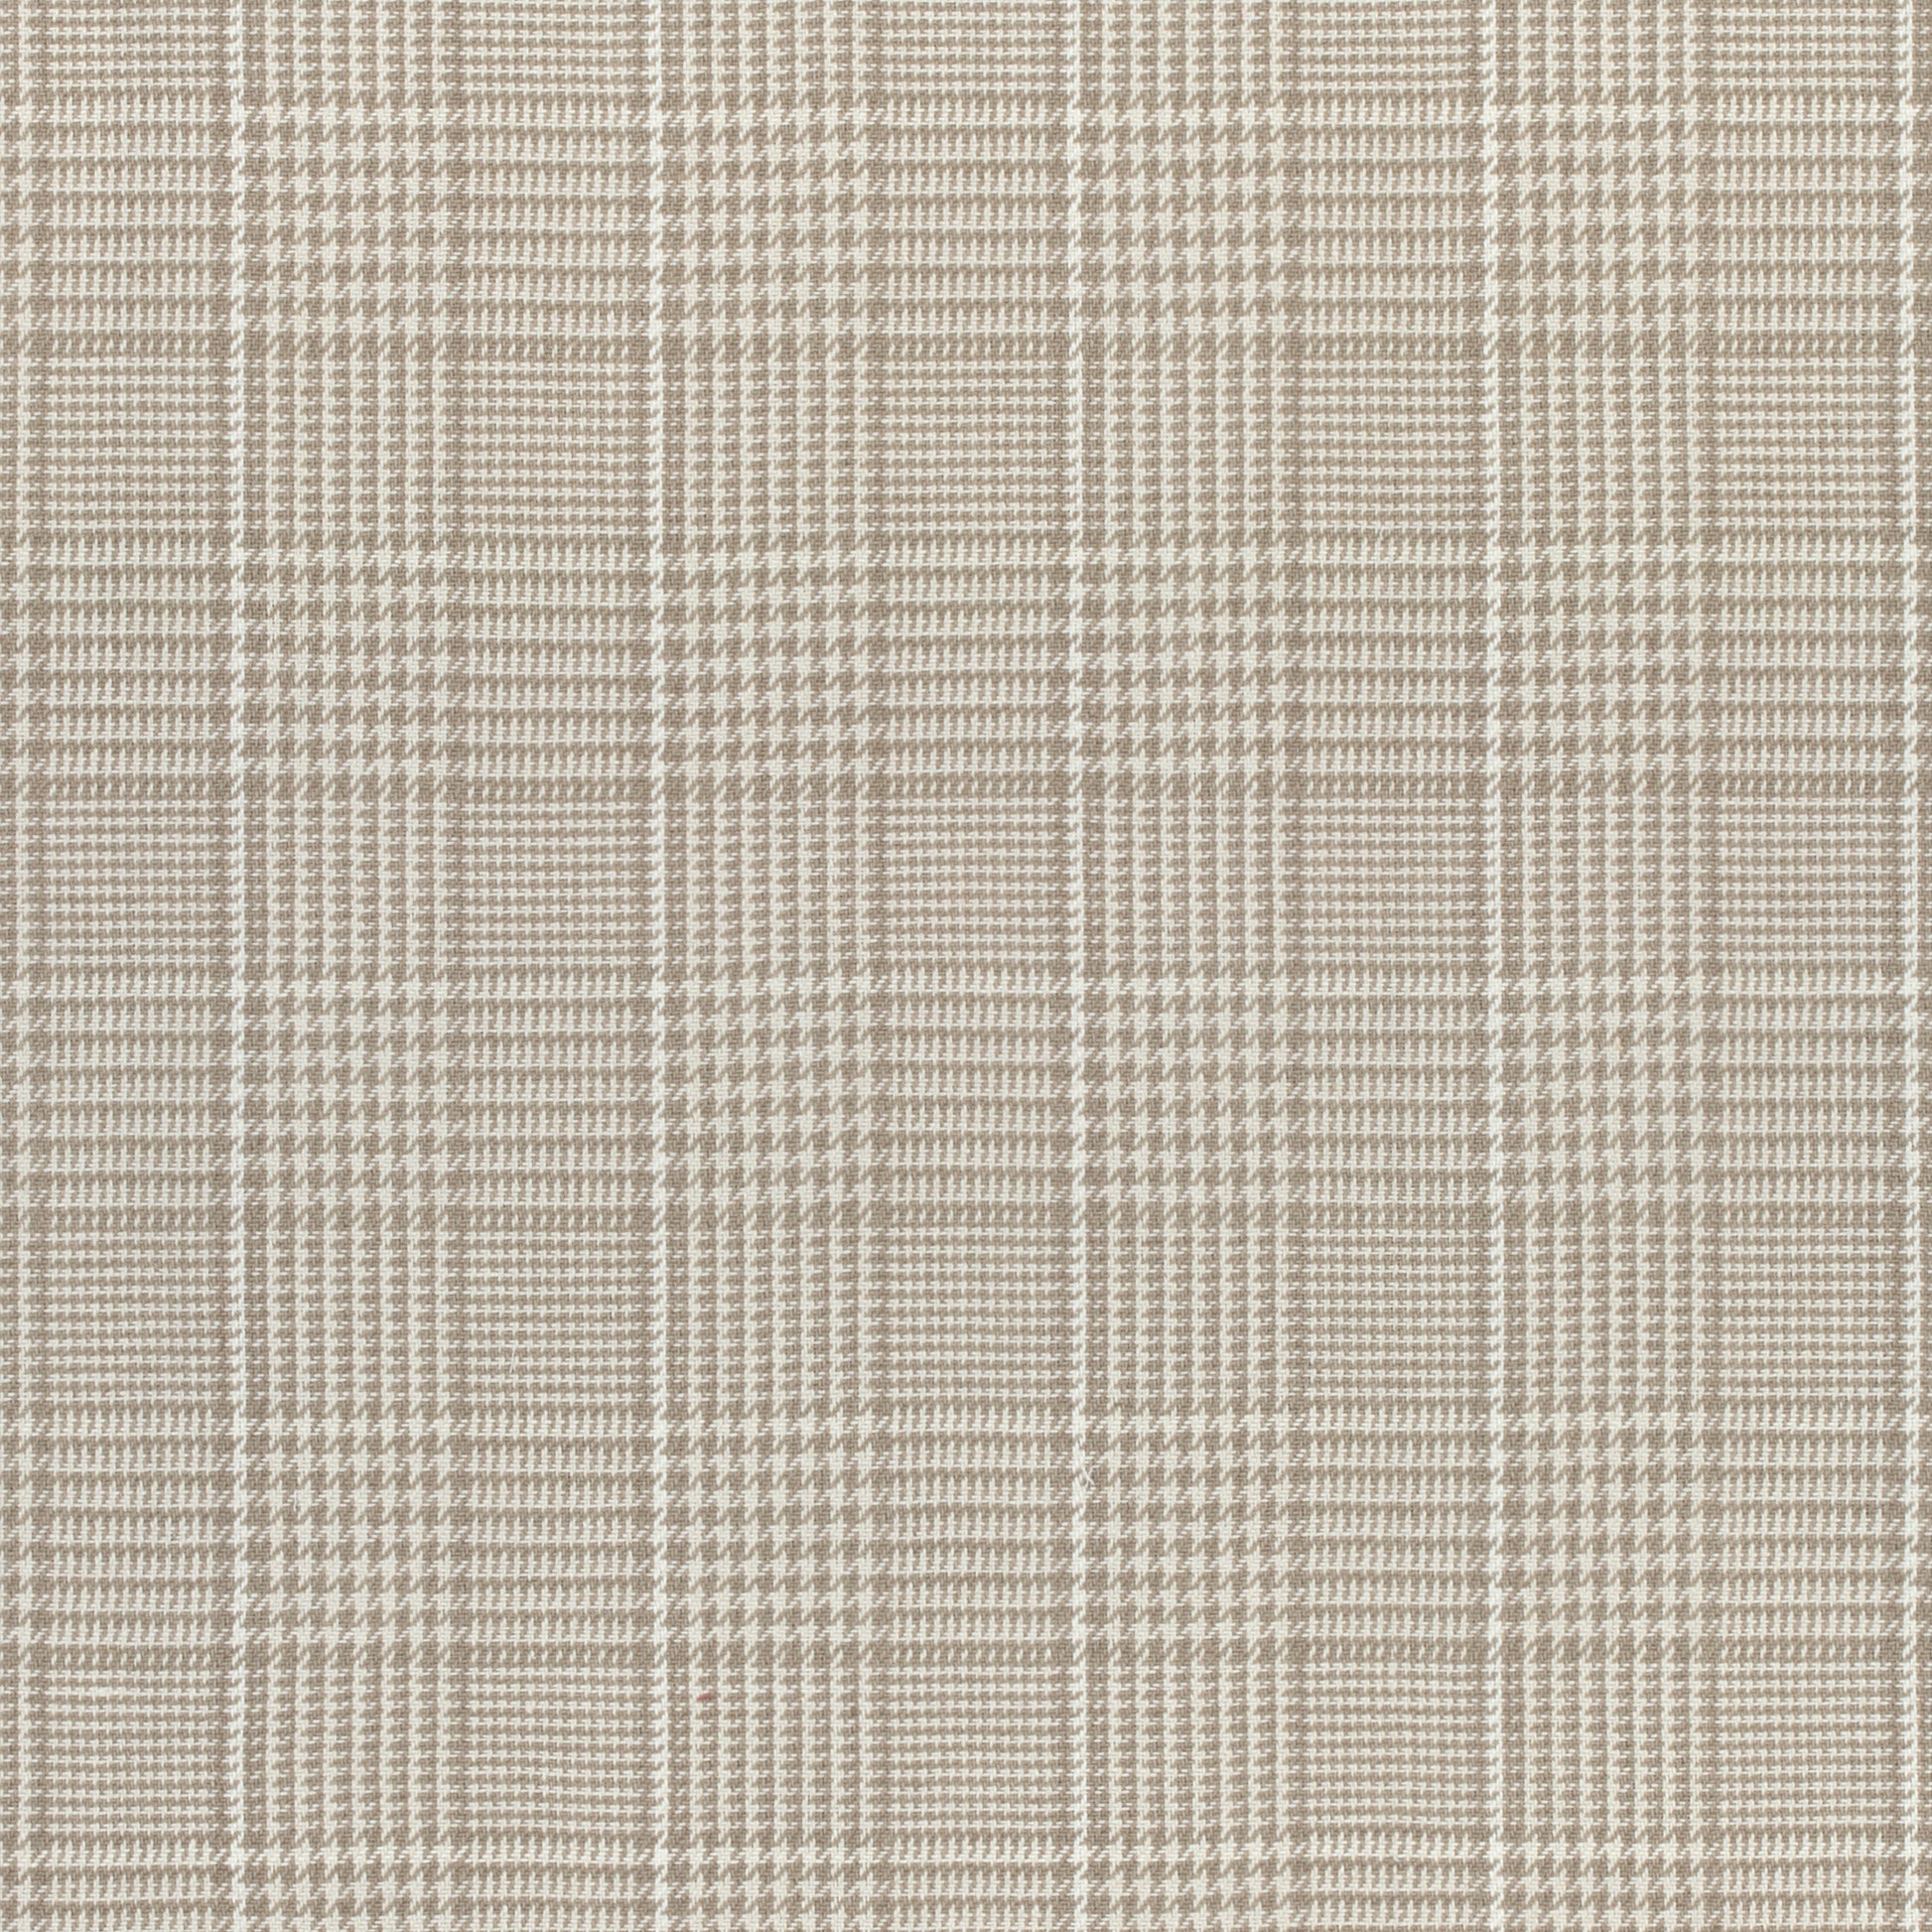 Purchase Thibaut Fabric SKU# W710205 pattern name Grassmarket Check color Beige